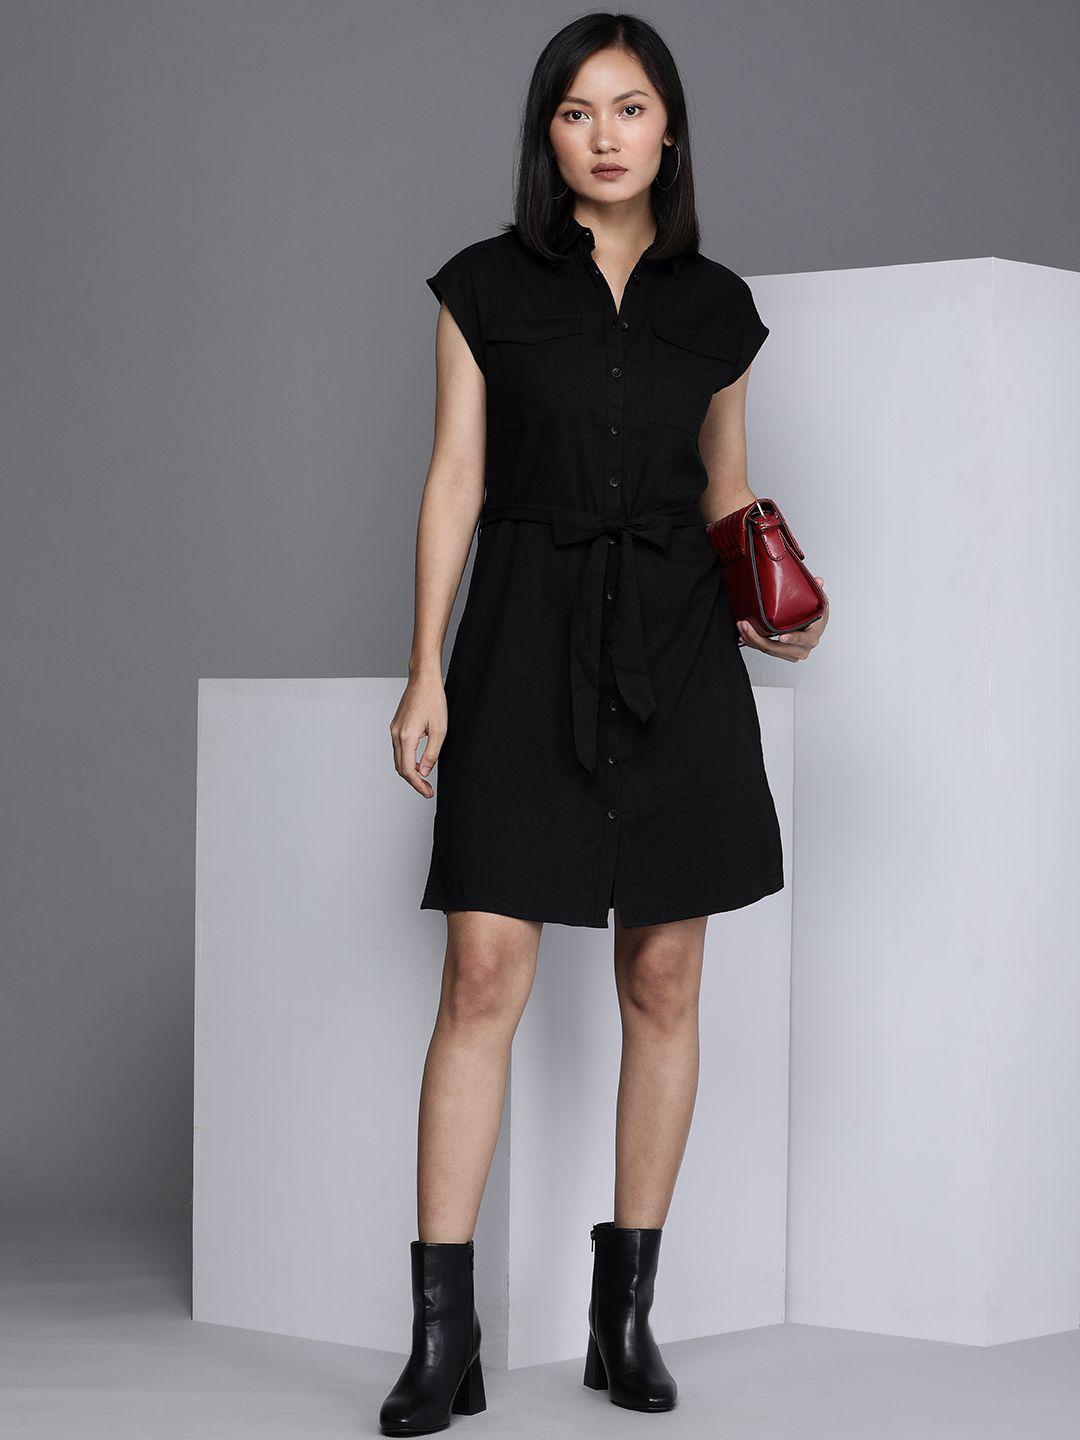 kenneth-cole-women-black-solid-shirt-dress-with-a-belt